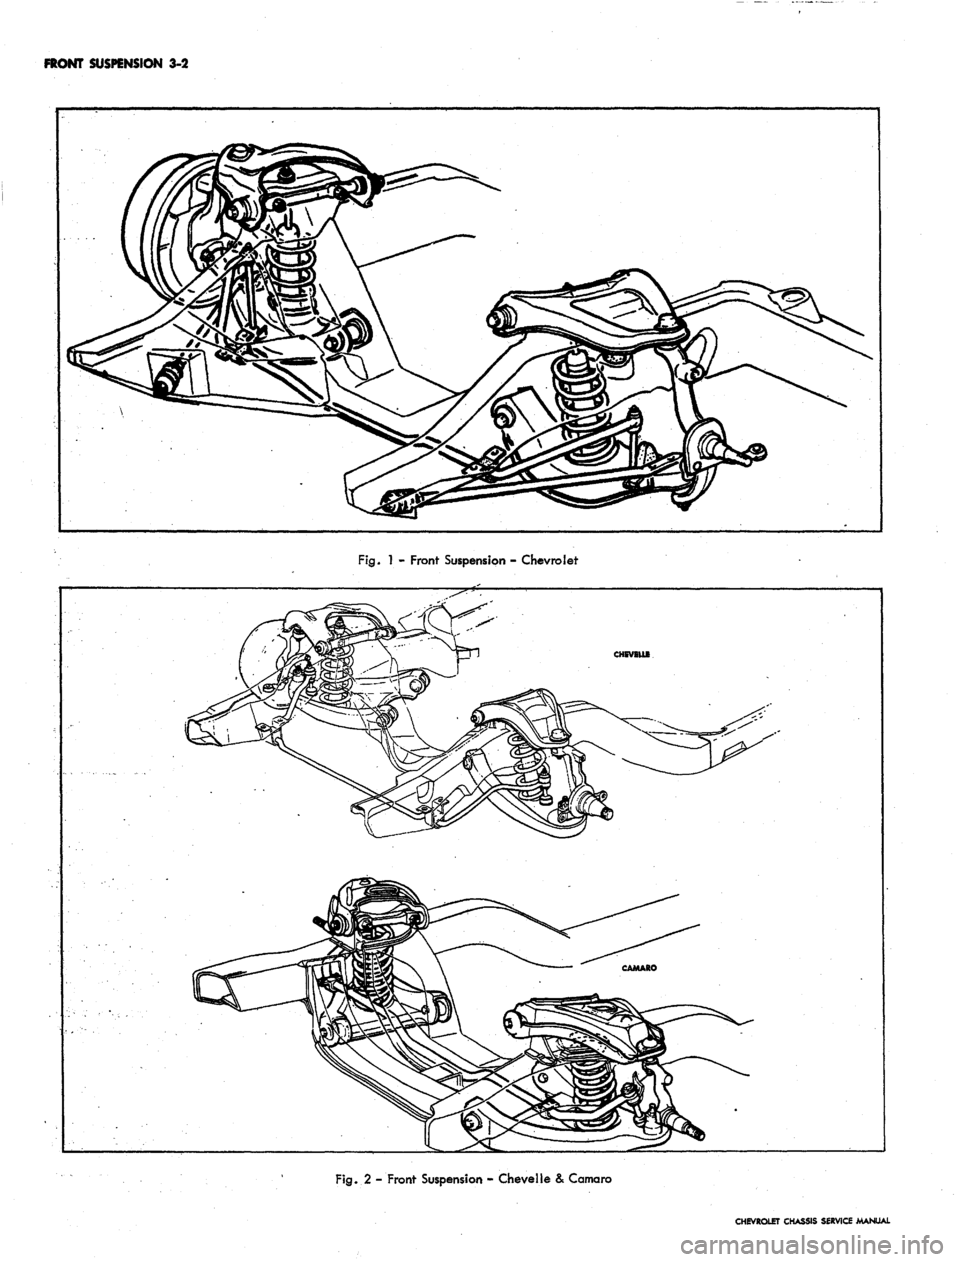 CHEVROLET CAMARO 1967 1.G Chassis Workshop Manual 
FRONT SUSPENSION 3-2

Fig.
 1 - Front Suspension - Chevrolet

Fig.
 2 - Front Suspension - Chevelle & Camaro

CHEVROLET CHASSIS SERVICE MANUAL 